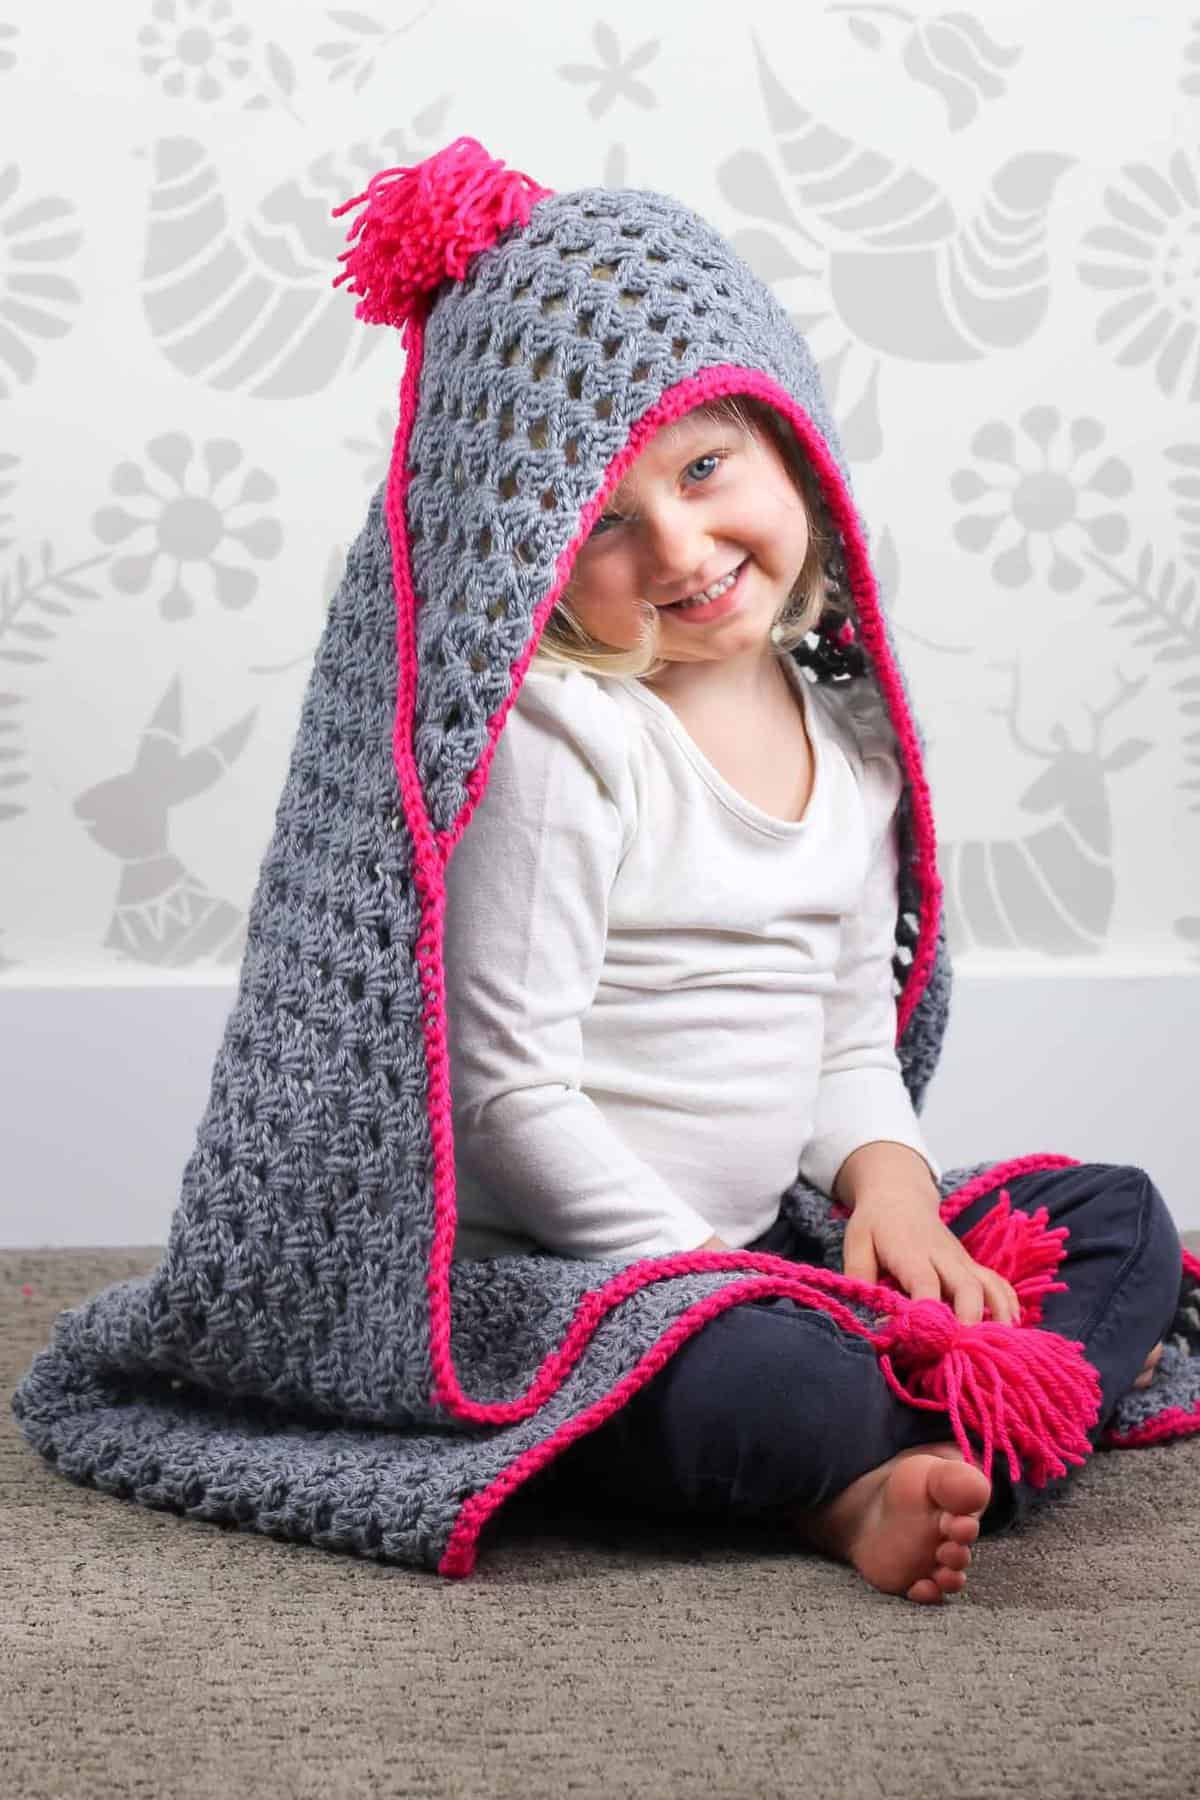 Based on a large granny square, the "Granny Gives Back" crochet hooded baby blanket pattern makes an easy and inexpensive project to donate to children's charities. The oversized hood and playful tassels will give any kid a safe, warm place to escape to. Click for the free pattern using Lion Brand Pound of Love yarn!